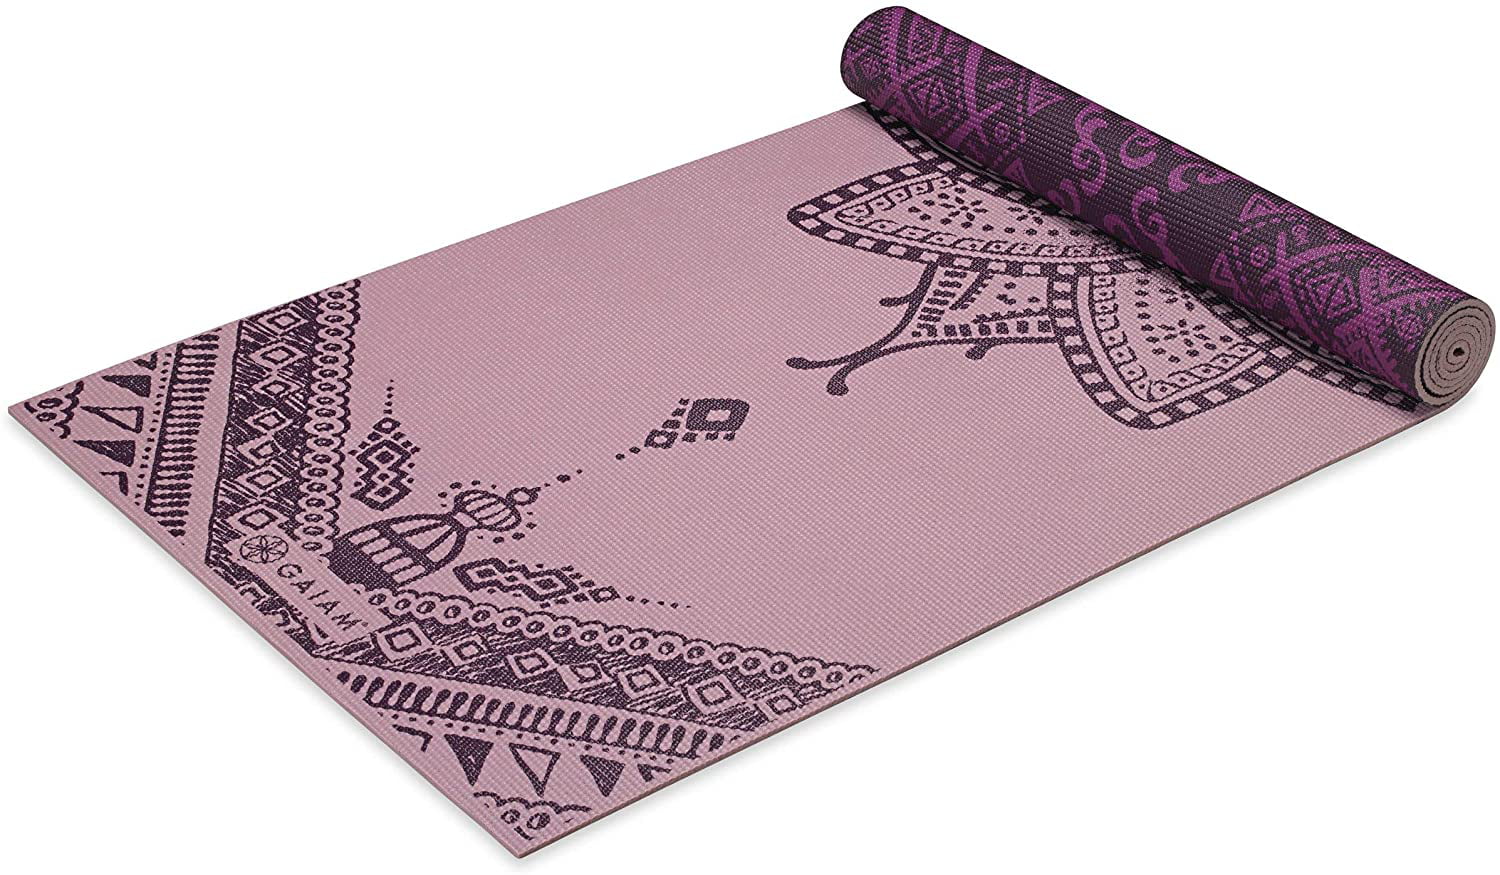 68 x 24 x 6mm Thick Gaiam Yoga Mat Pilates & Floor Workouts Premium 6mm Print Reversible Extra Thick Non Slip Exercise & Fitness Mat for All Types of Yoga